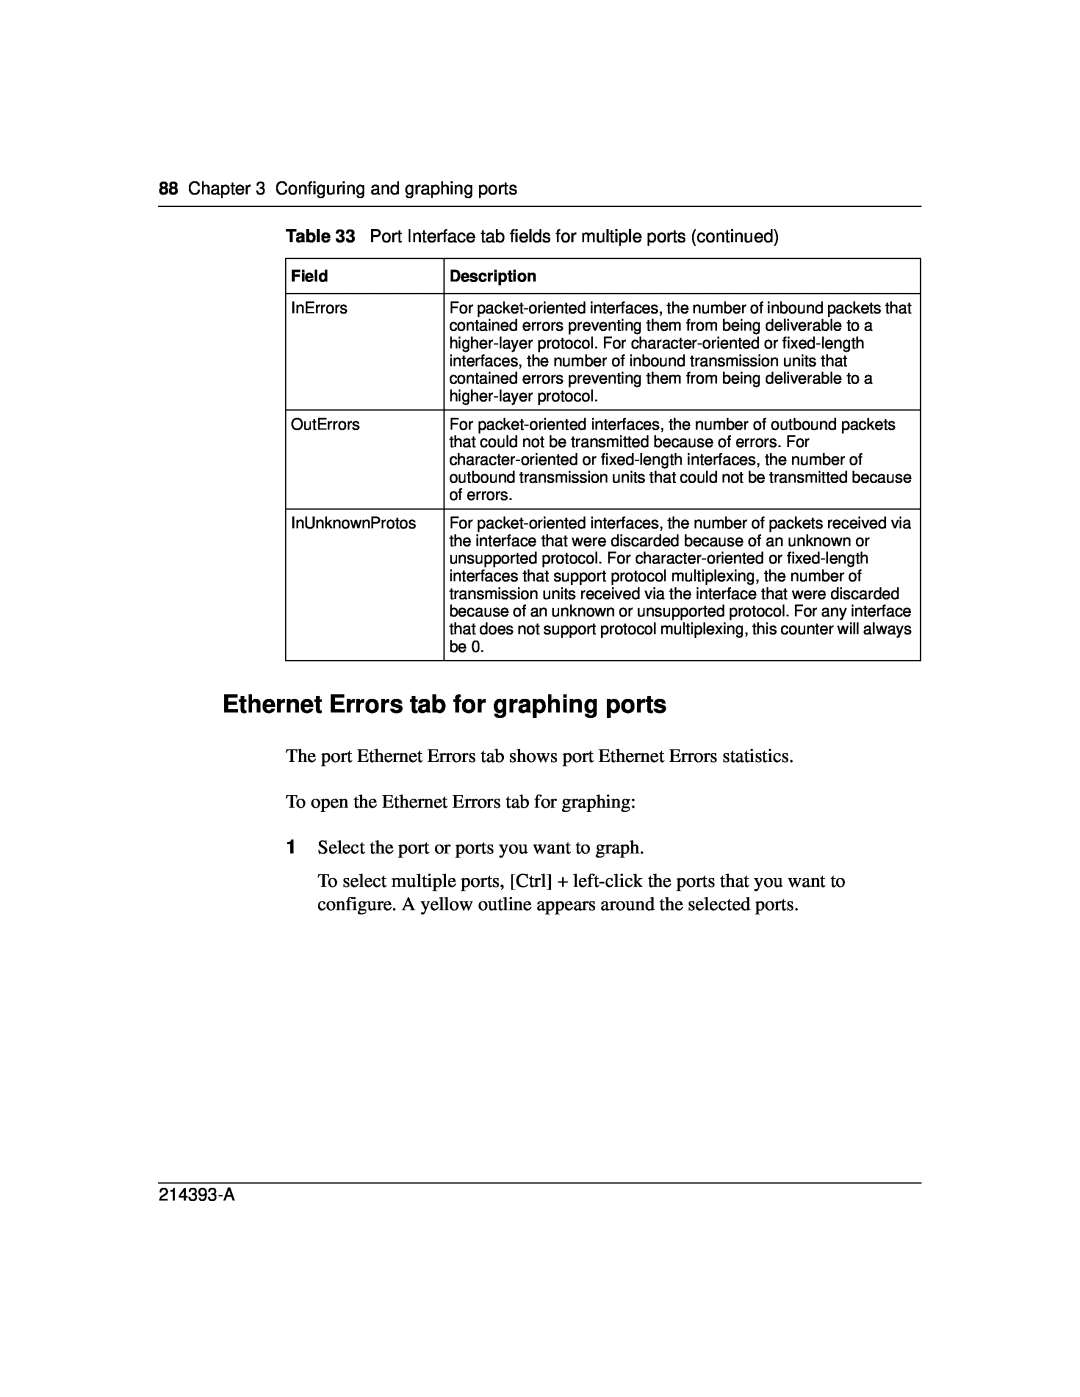 Nortel Networks 214393-A manual Ethernet Errors tab for graphing ports, 88Chapter 3 Configuring and graphing ports, Field 